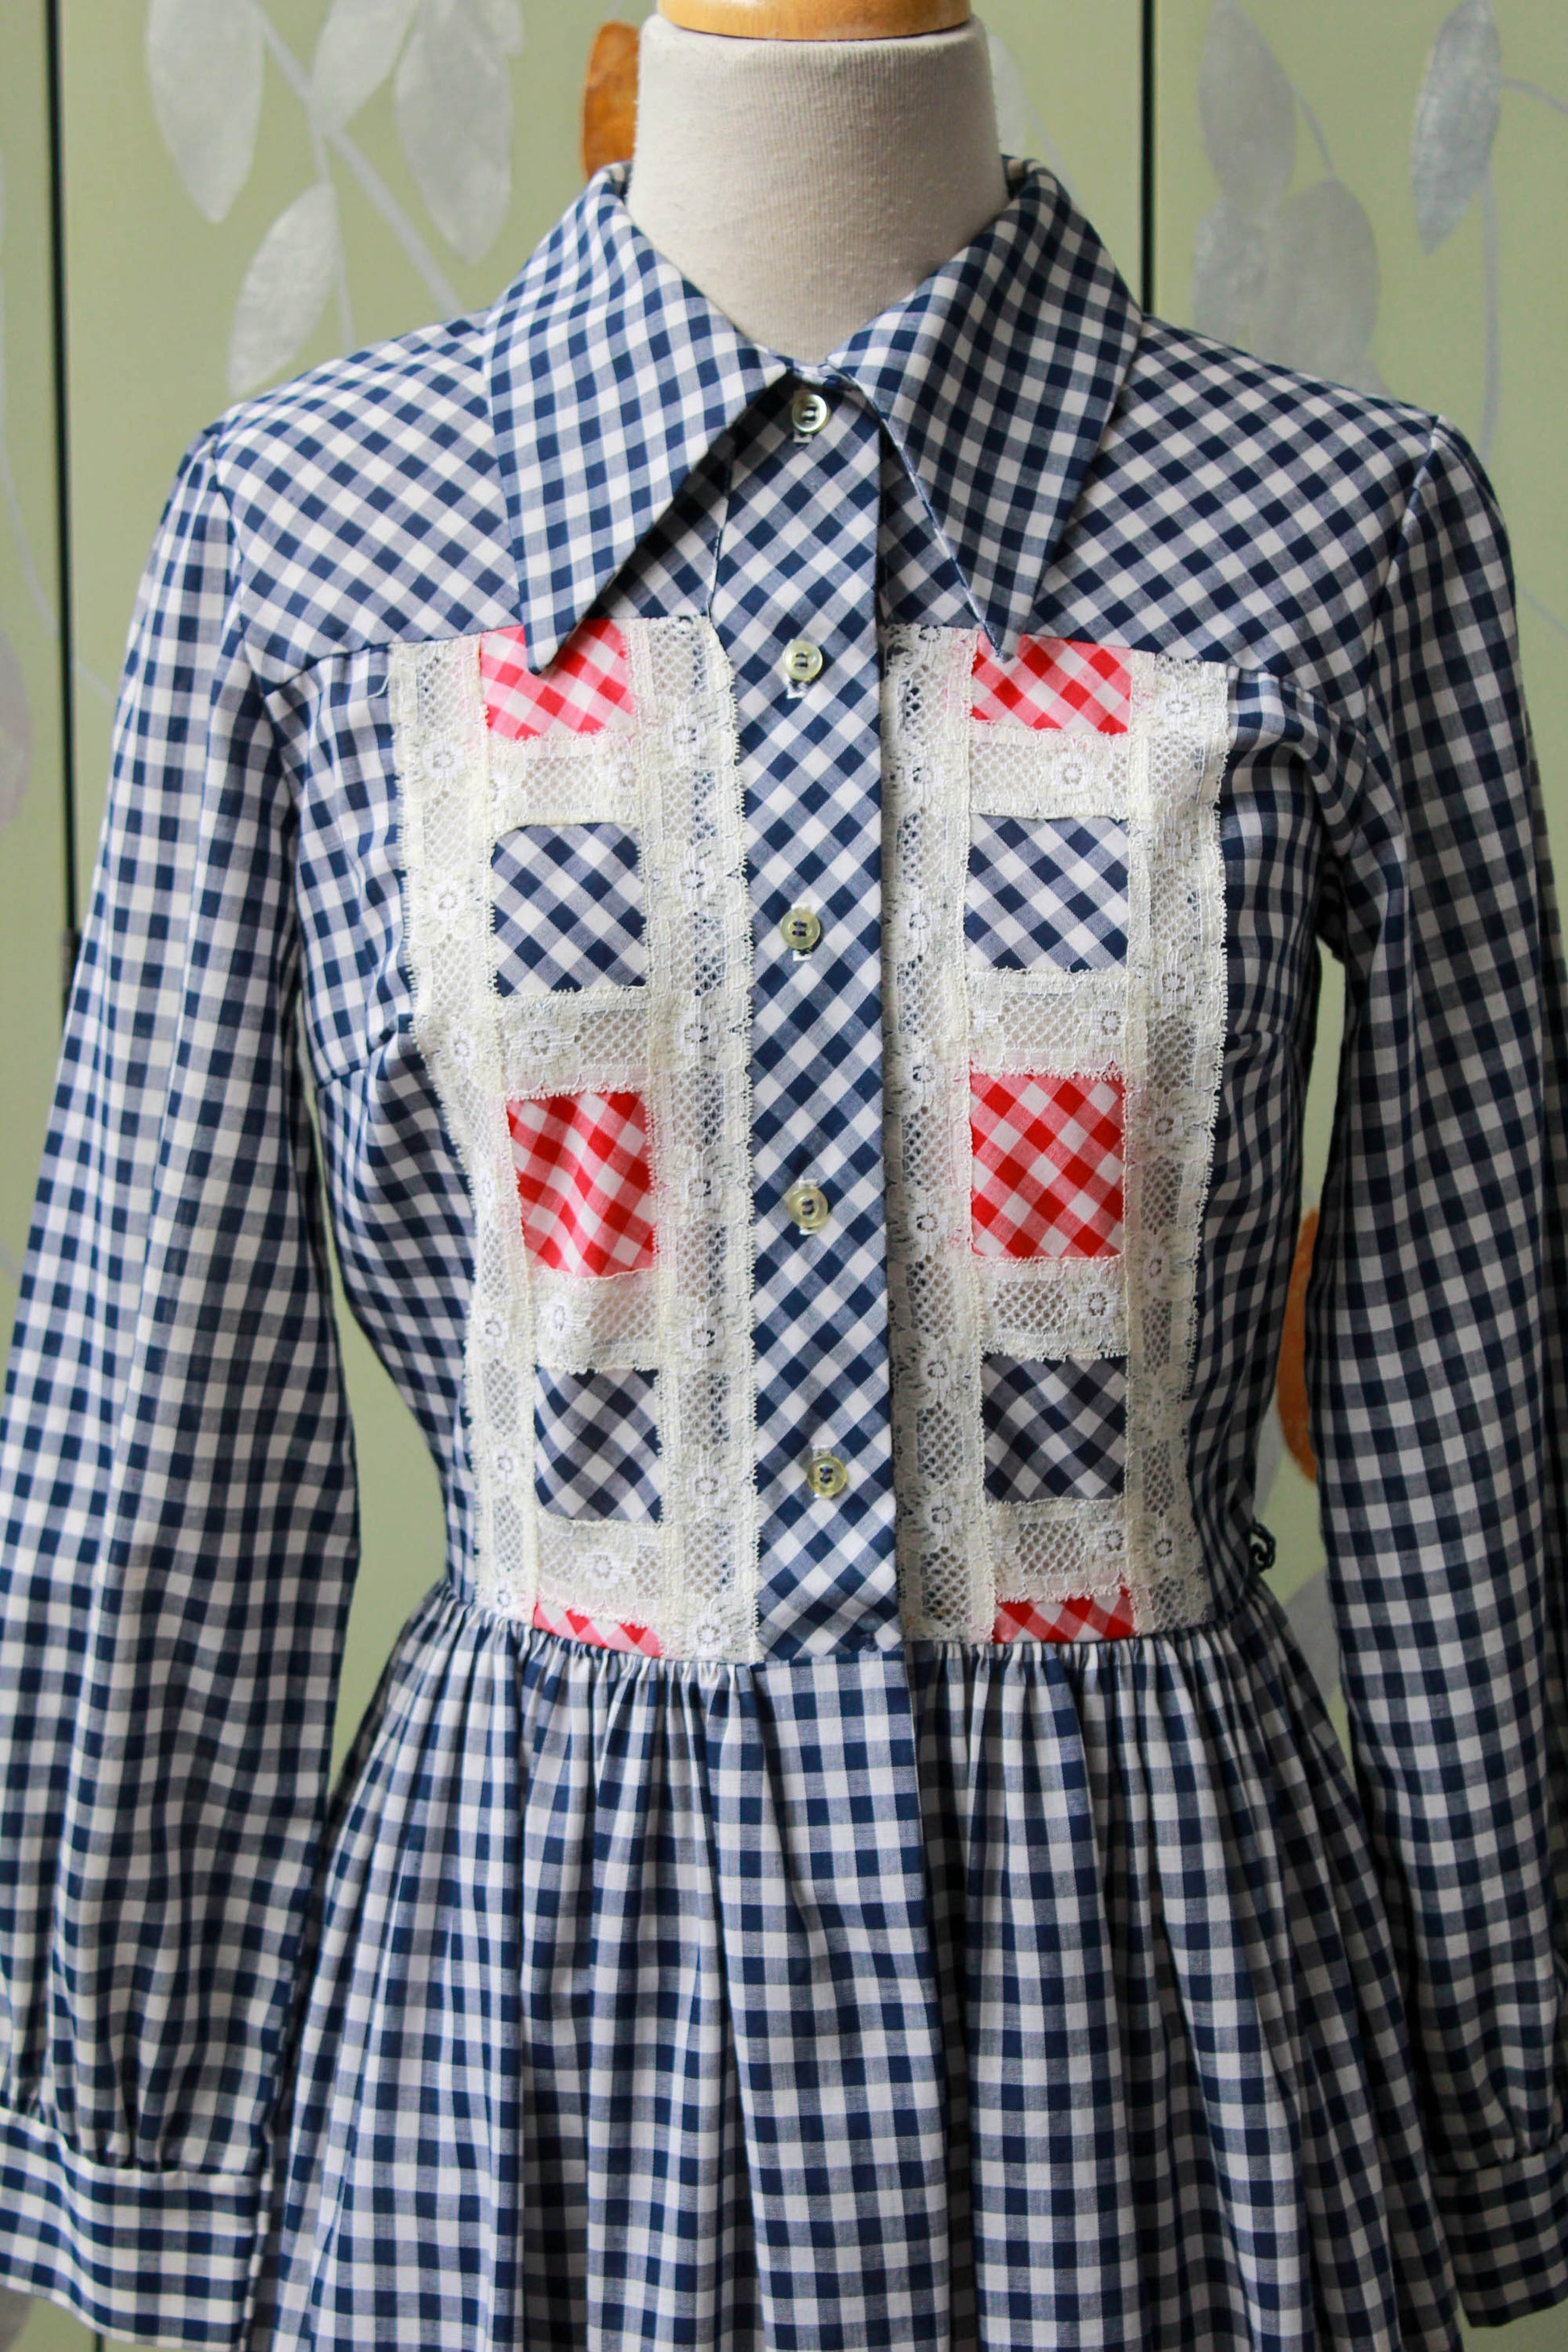 1970s blue white gingham cotton cowgirl dress gathered skirt, button up front with large 70s collar, long sleeve